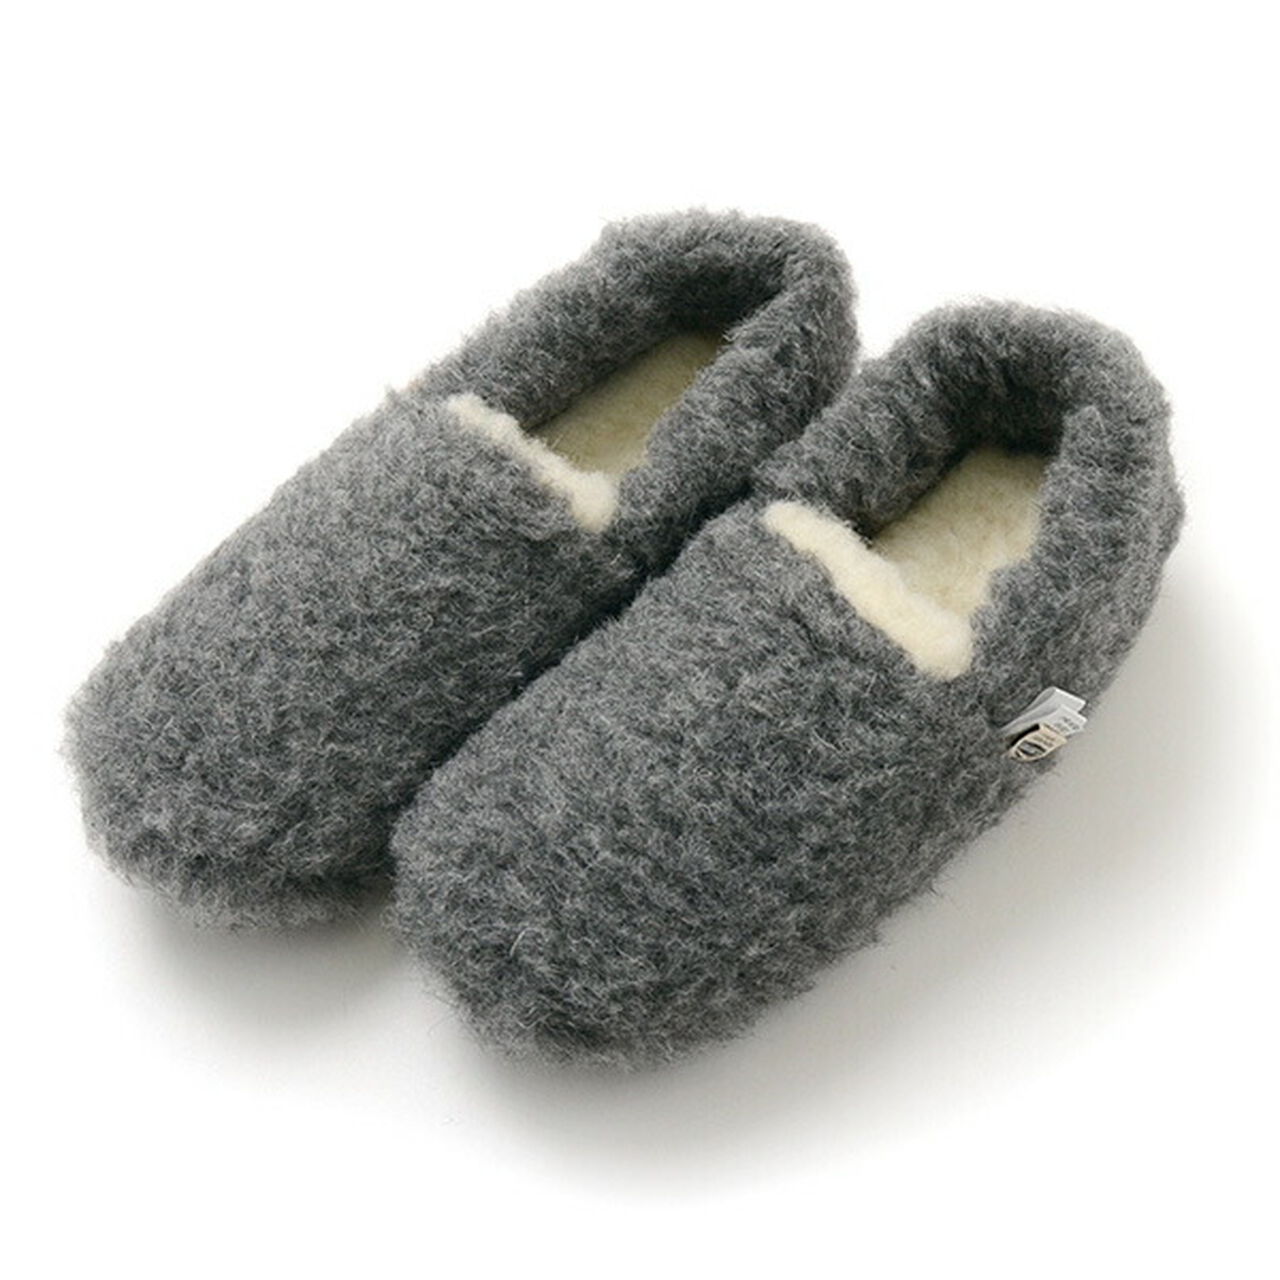 Boa Wool Shorty Slippers,Graphite, large image number 0